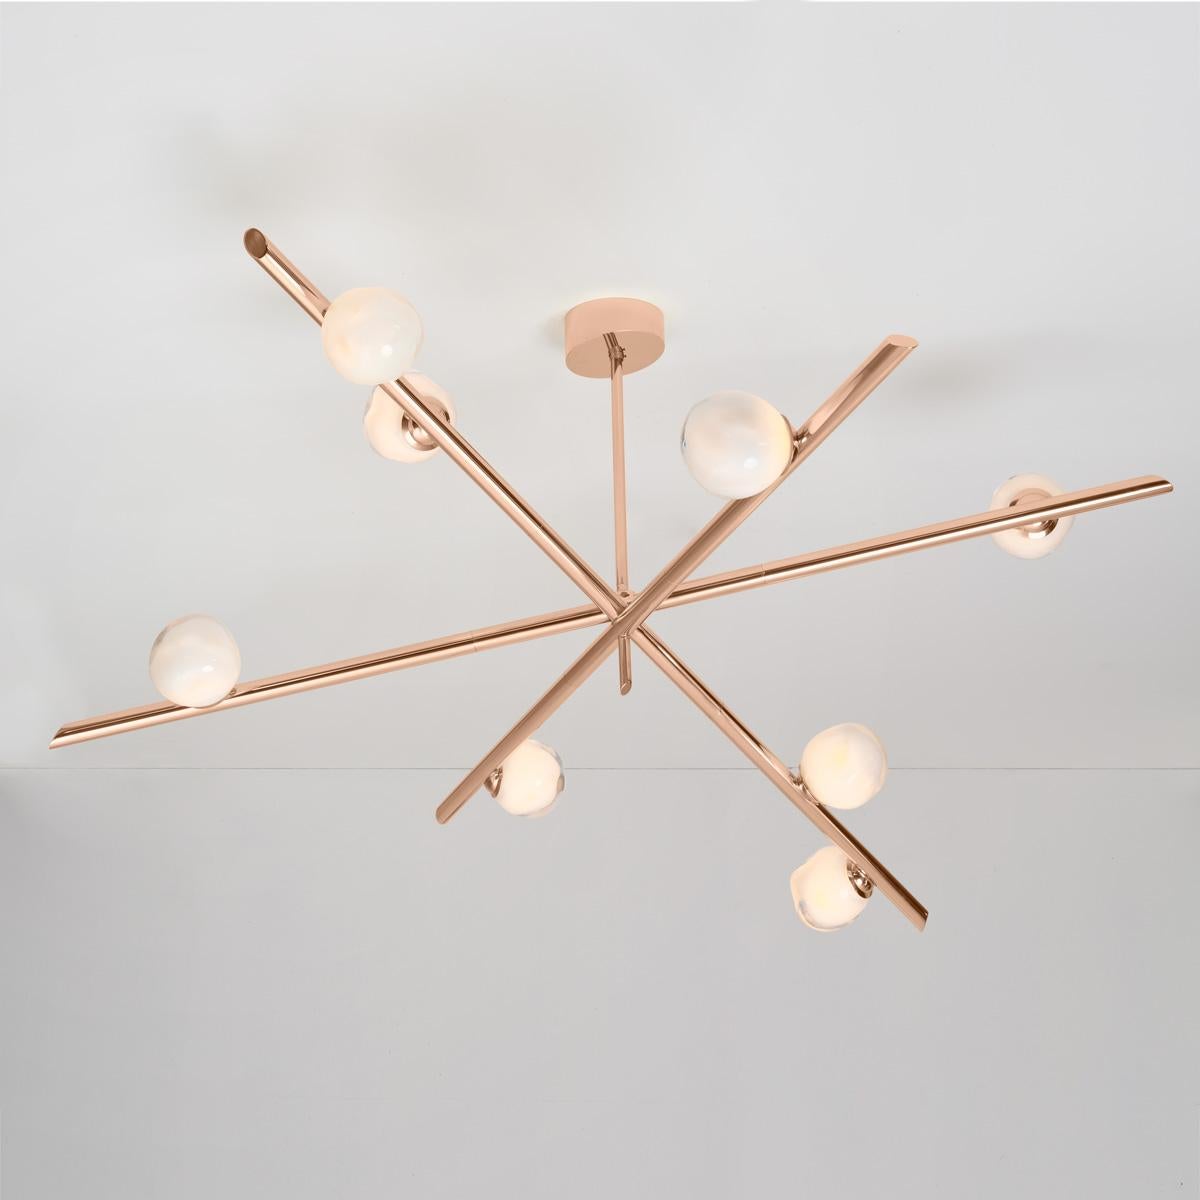 The Antares X3 ceiling light harmoniously balances the linear details of its intersecting arms with the organic form of its handblown glass shades. The first images show the fixture in our polished copper finish-subsequent pictures show it in a